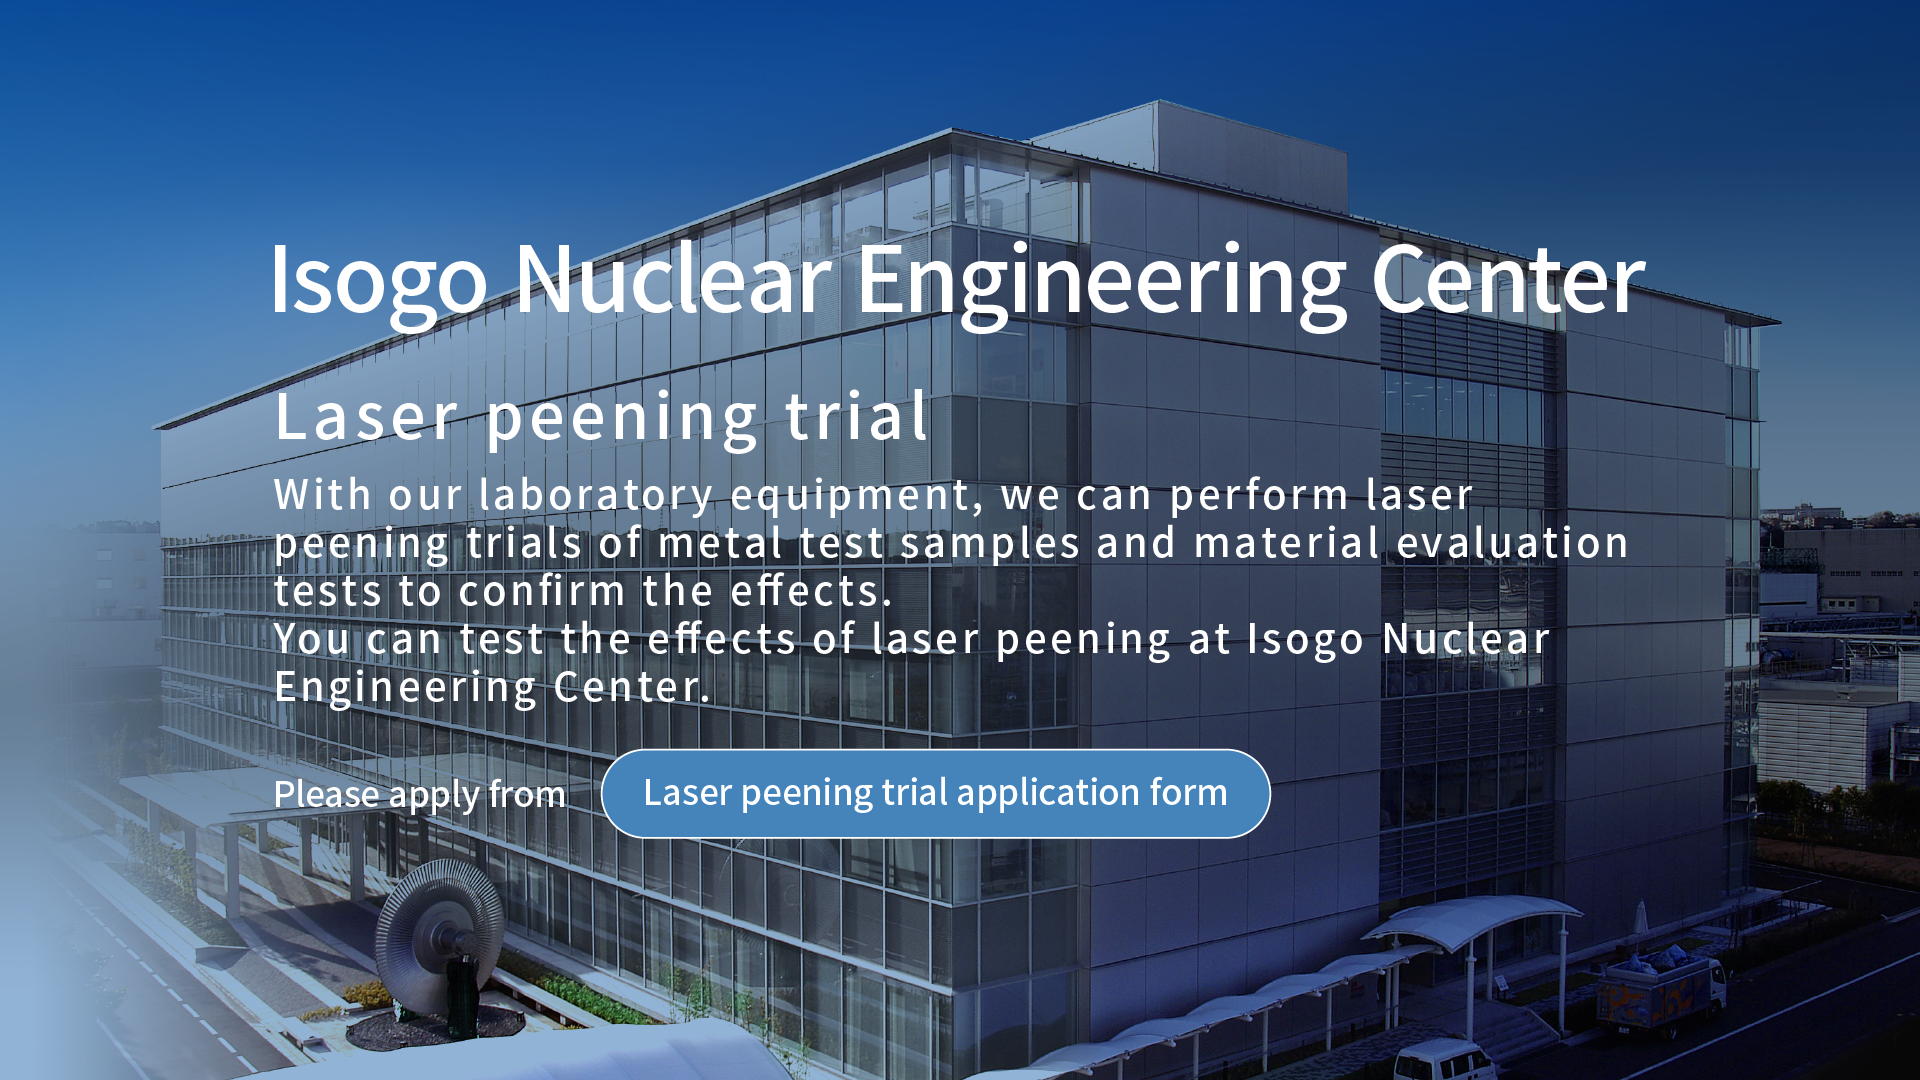 Isogo Nuclear Engineering Center.